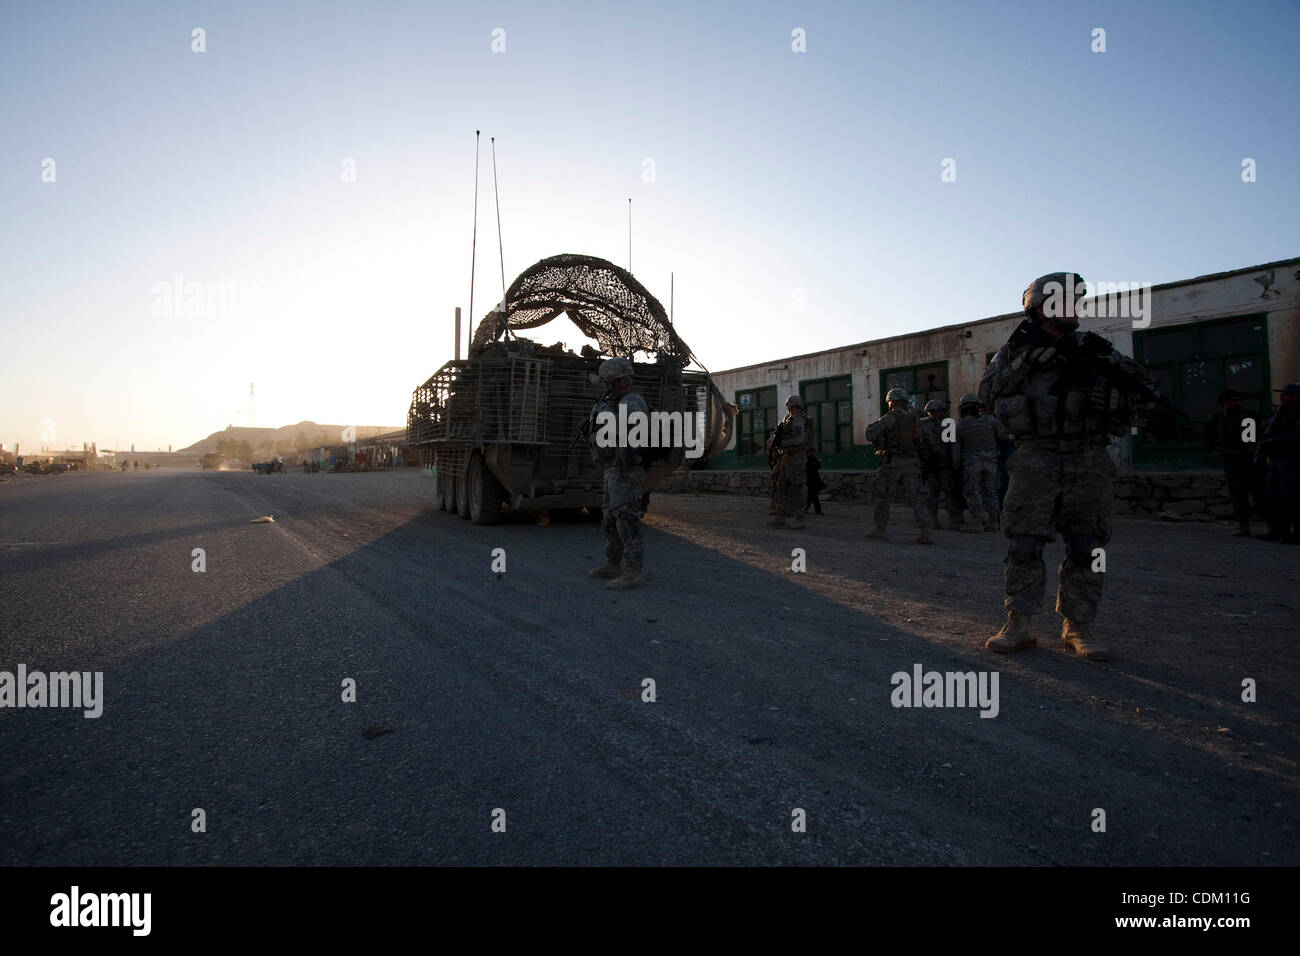 Mar 29, 2011 - Qalat, Zabul province, Afghanistan - Members of MGS Platoon, Fox Company of 2nd Squadron, 2nd Stryker Cavalry Regiment secure the area as members of the Afghan National Police Headquarters Reserve Kandak conduct a raid on a target in the City of Qalat, Zabul province, Afghanistan. The Stock Photo